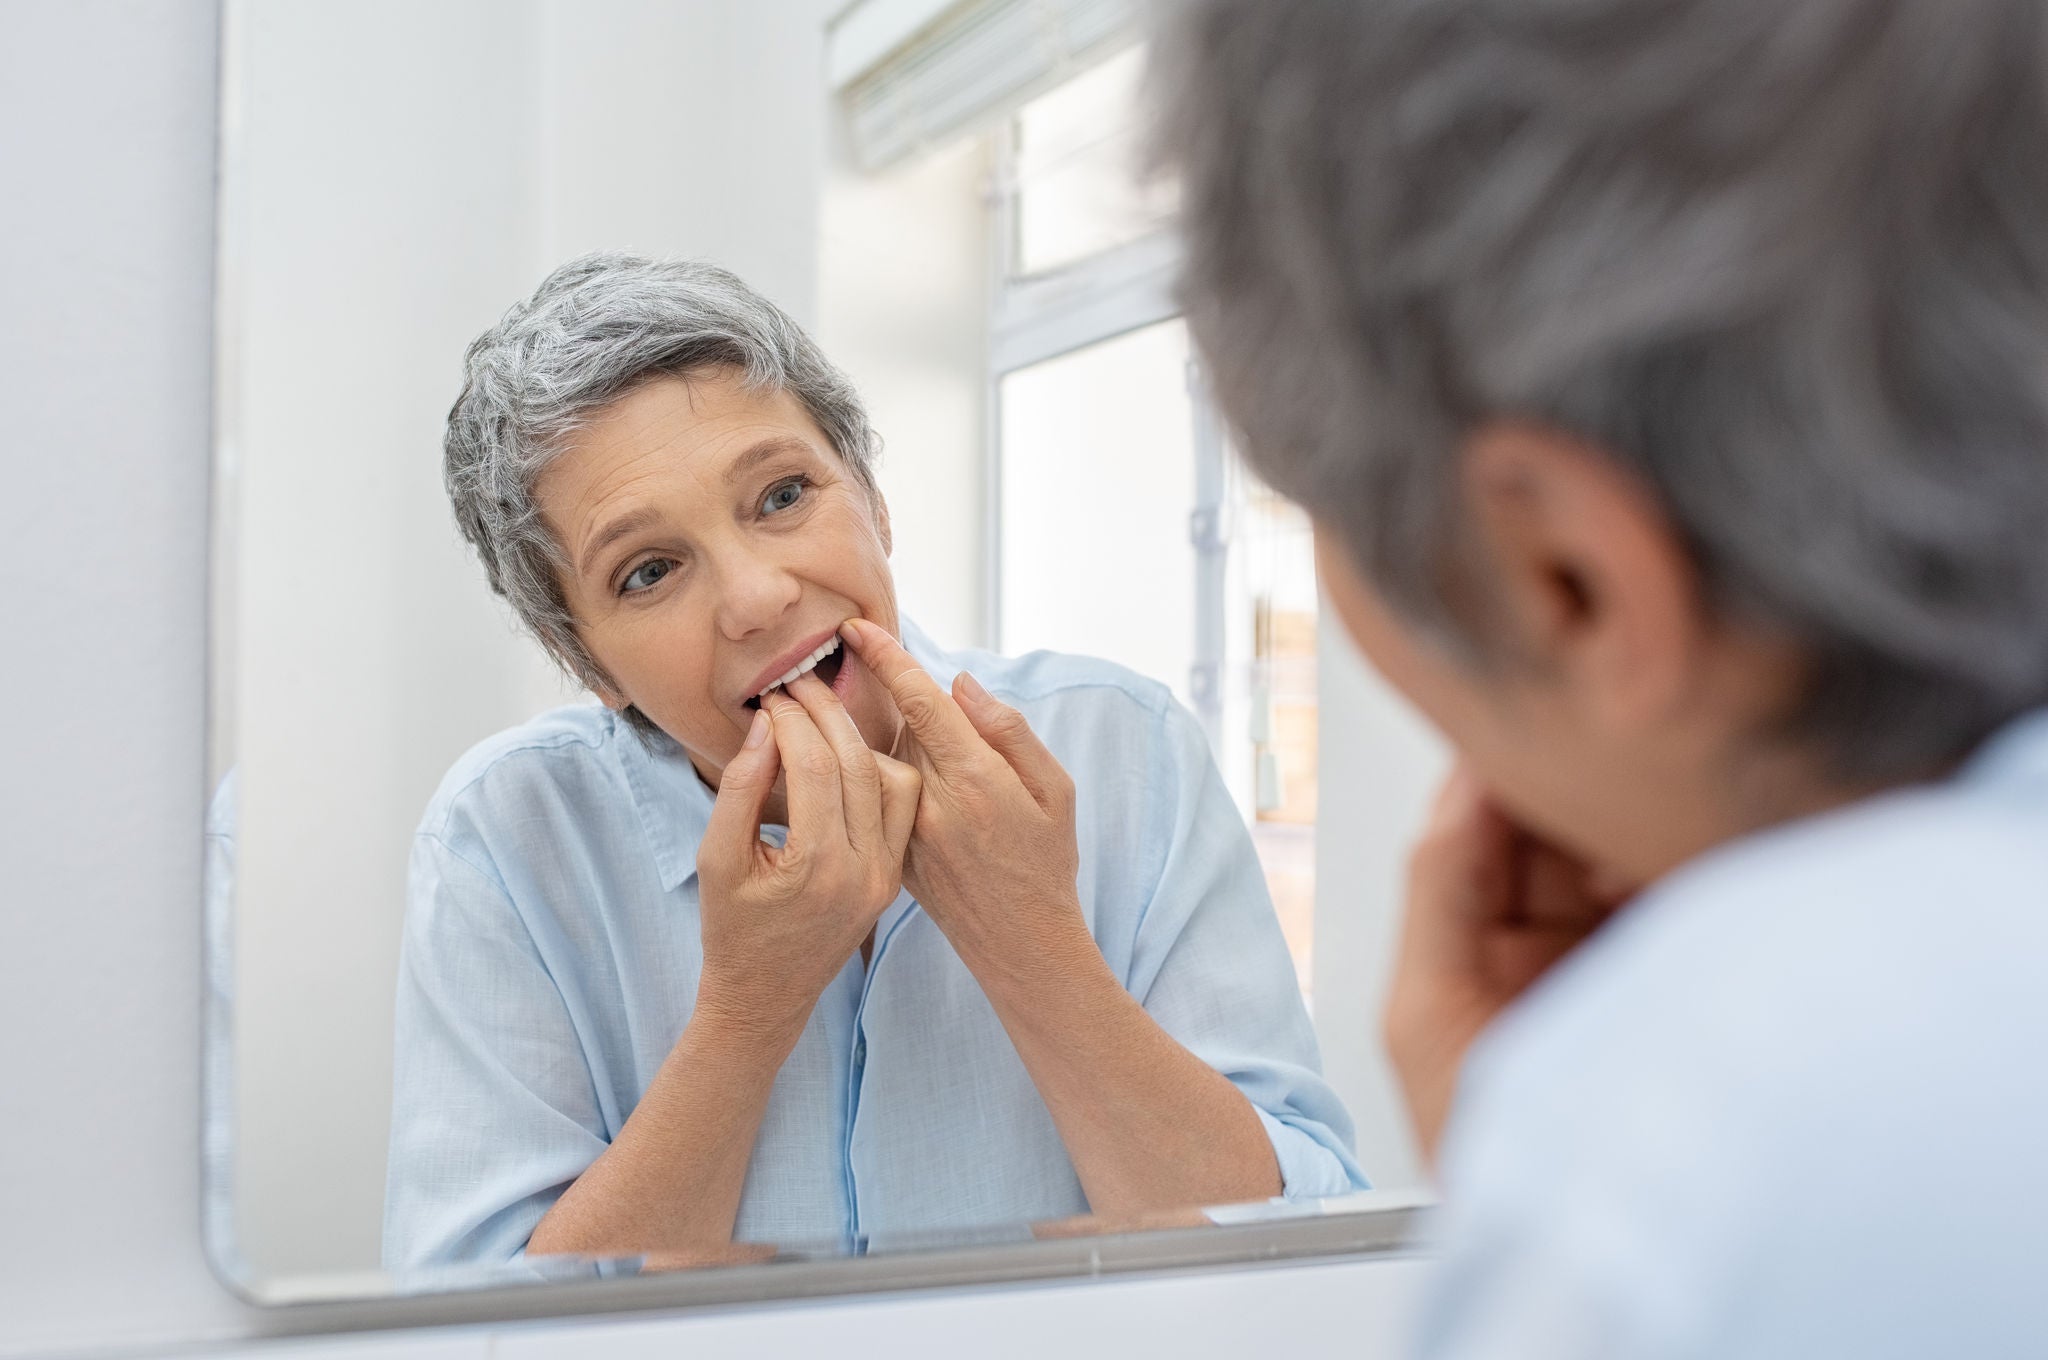 Mature beautiful woman cleaning her teeth with floss in bathroom. Reflection of senior woman in bathroom mirror while cleaning teeth with dental floss. Healthcare and oral hygiene concept.